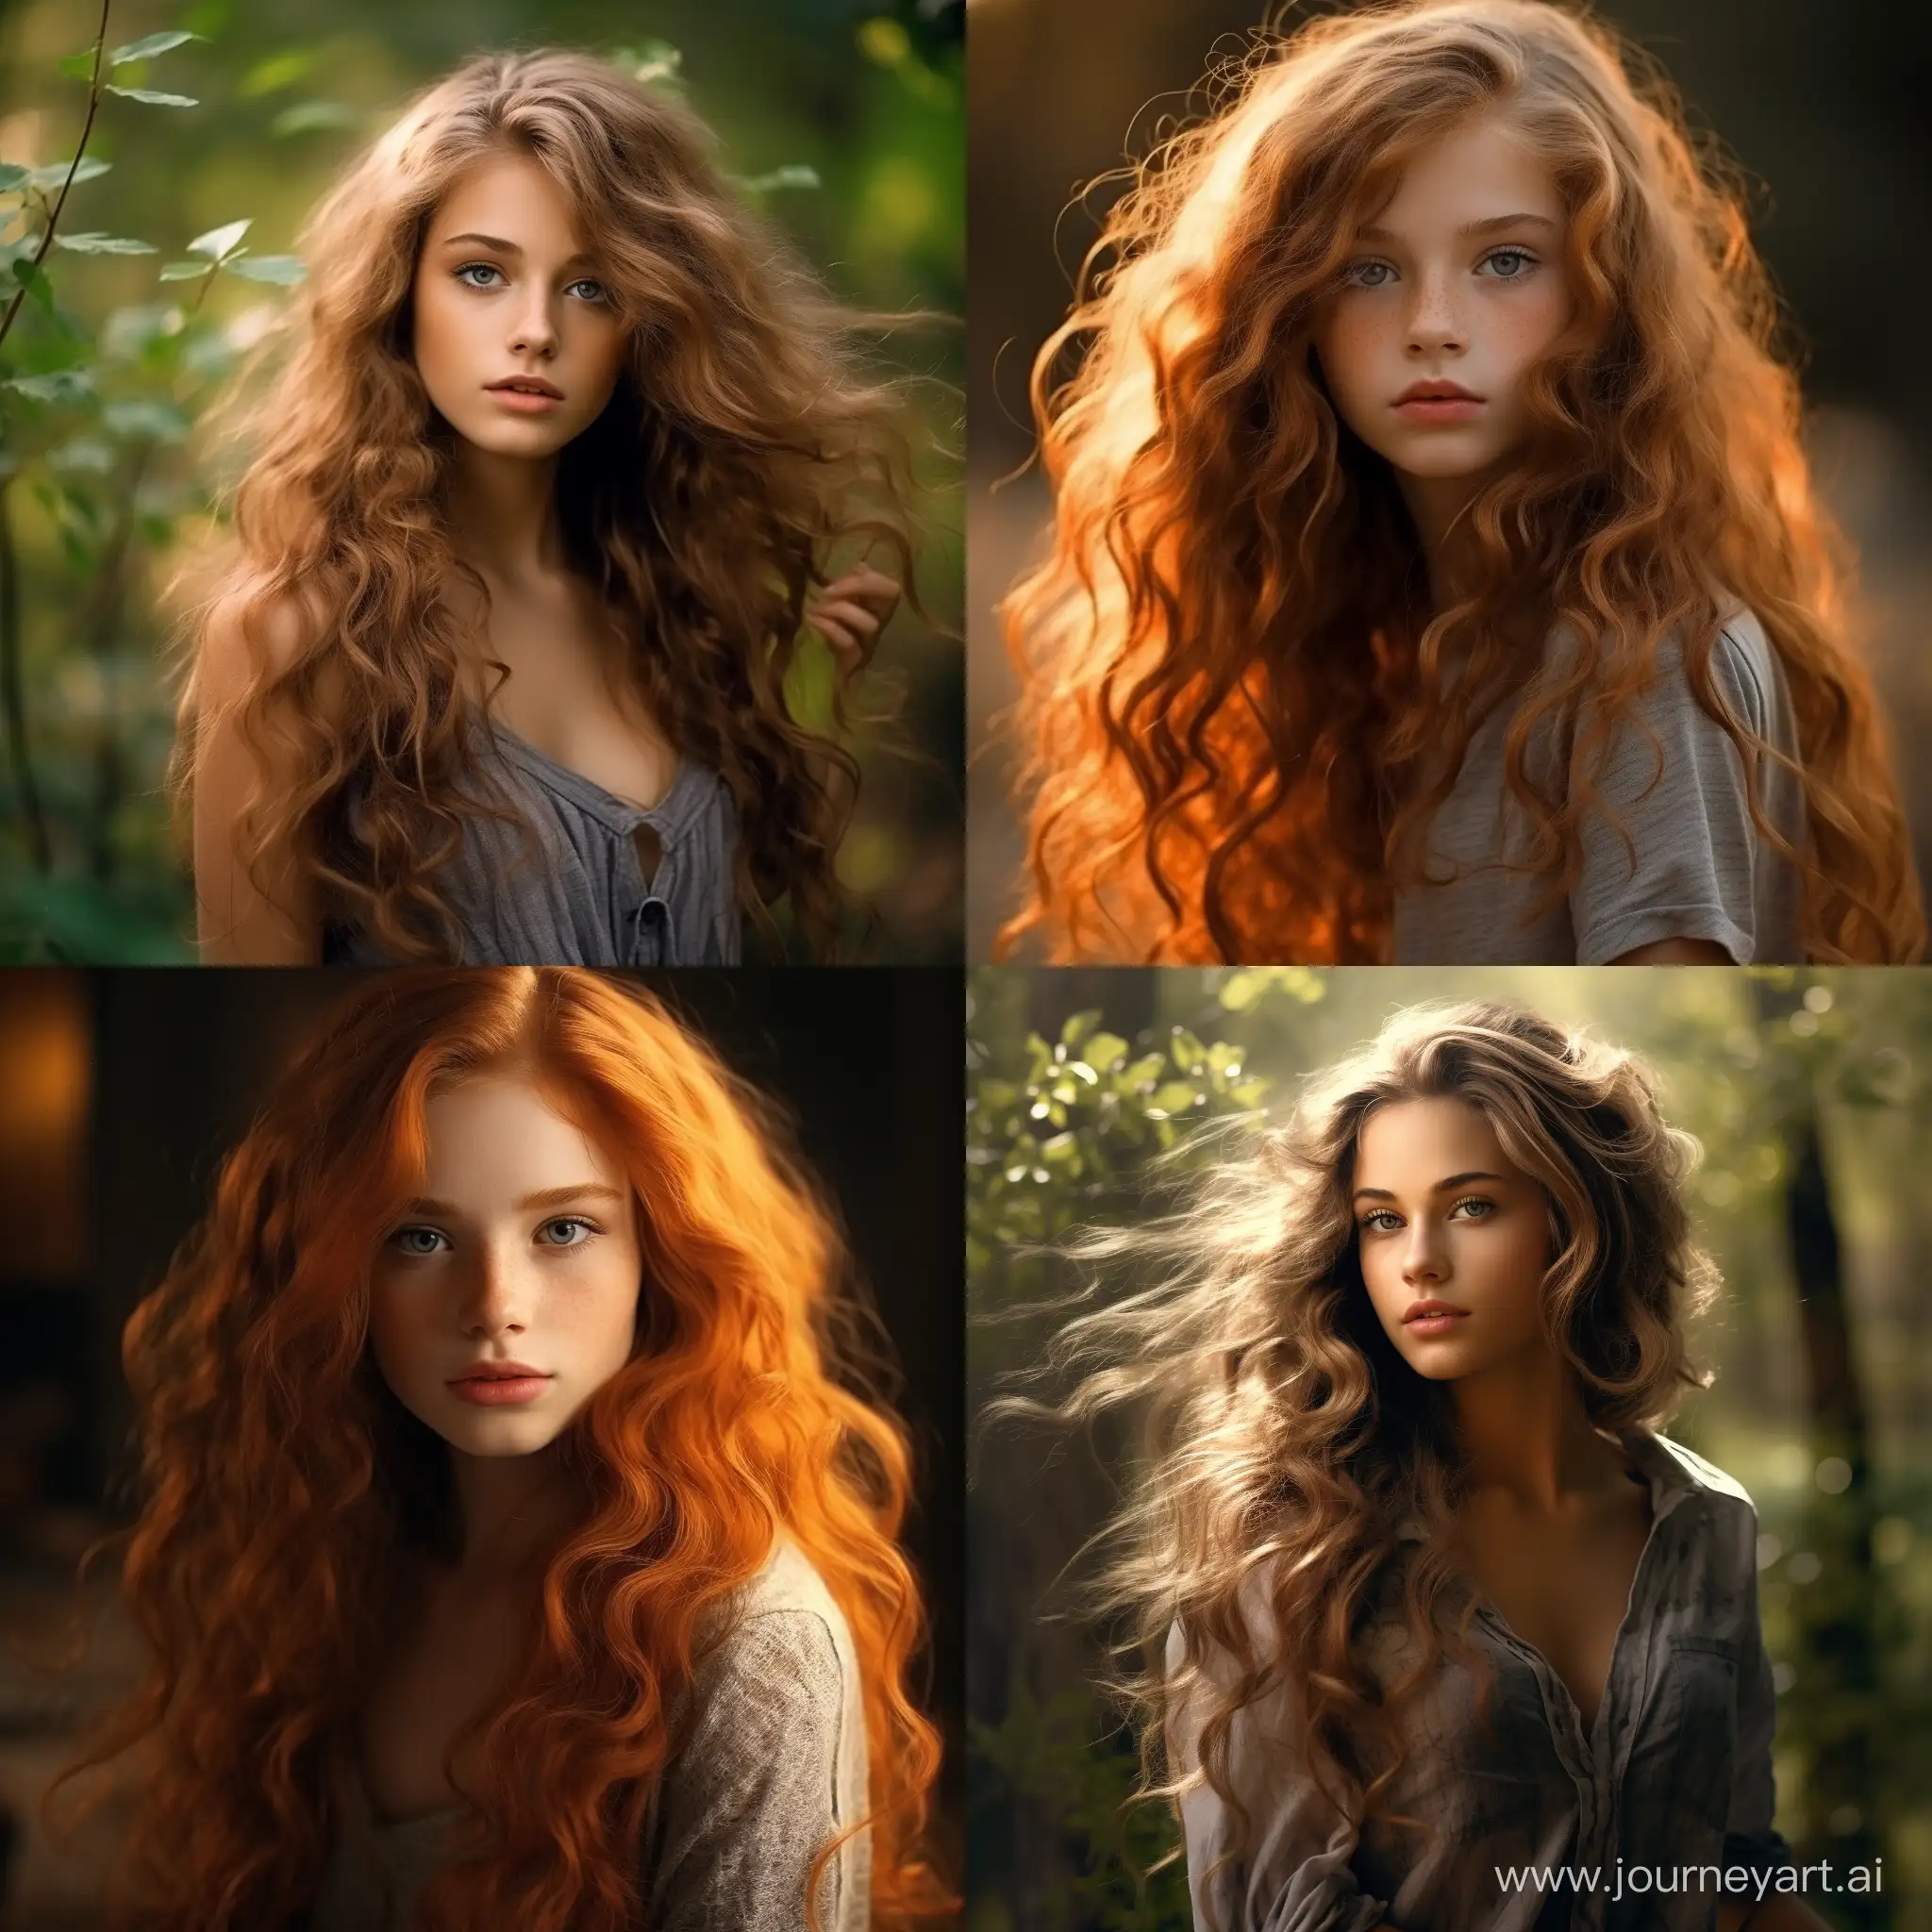 Four-Stunning-Photos-of-a-Radiant-Girl-in-Square-Format